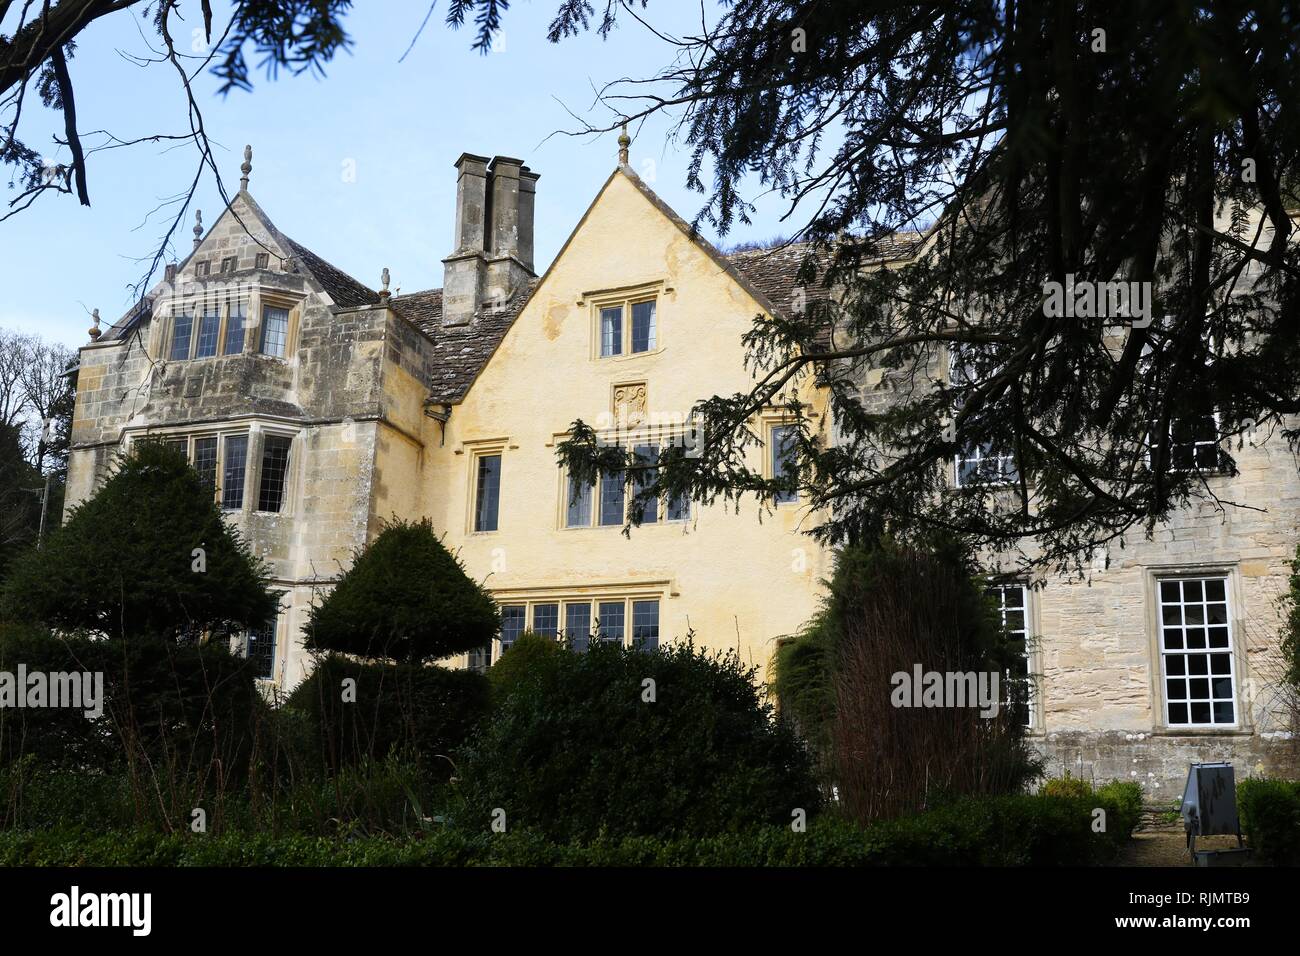 Owlpen Manor, the grade 1 listed Tudor country house in the village of Owlpen, near Stroud, Gloucestershire, England, UK. Stock Photo